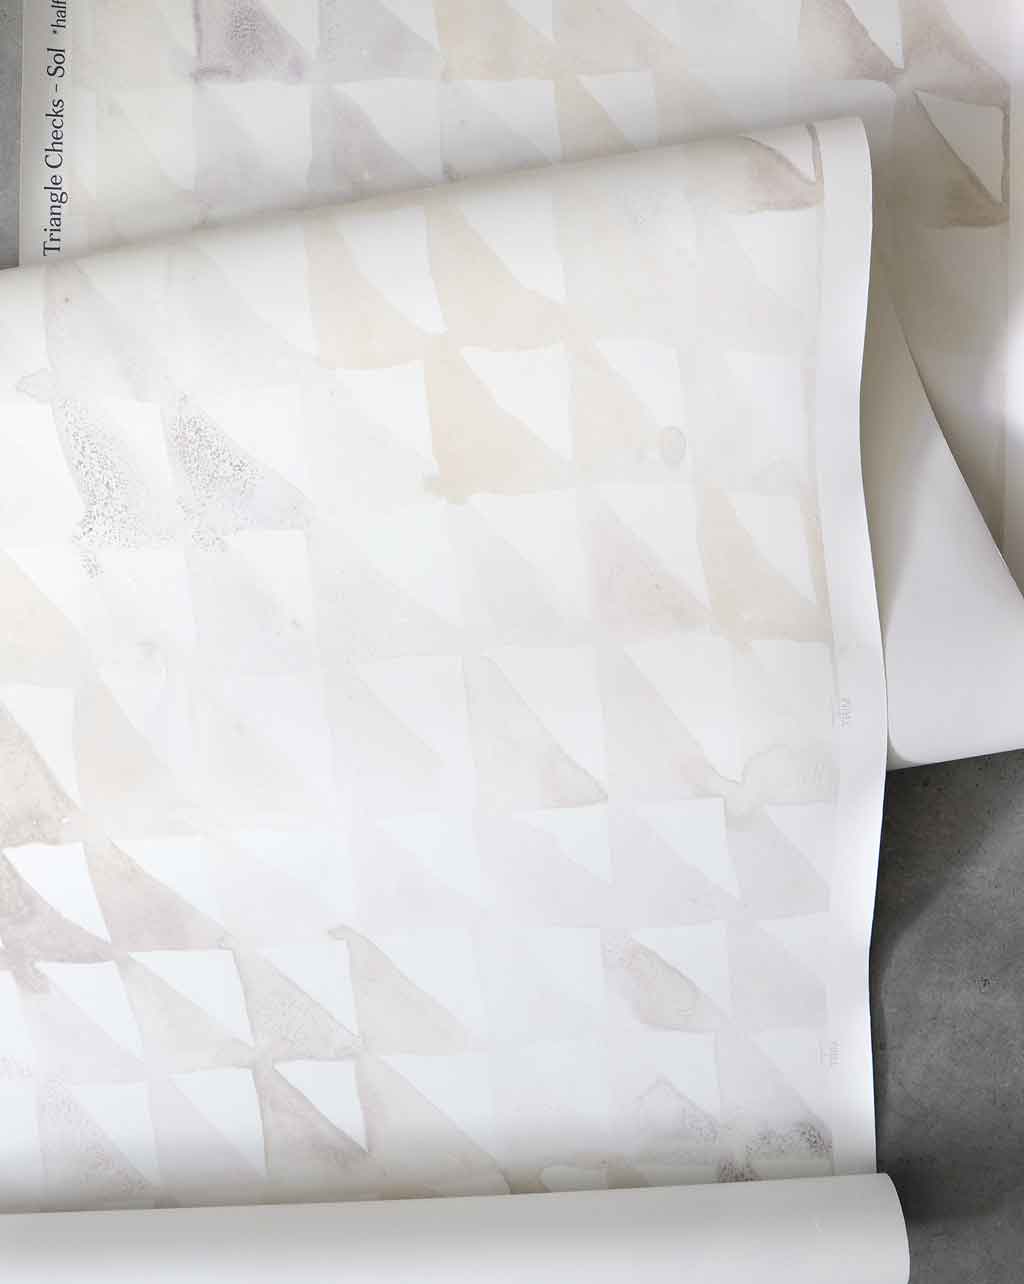 A roll of Triangle Checks Wallpaper Sol with geometric patterns on it